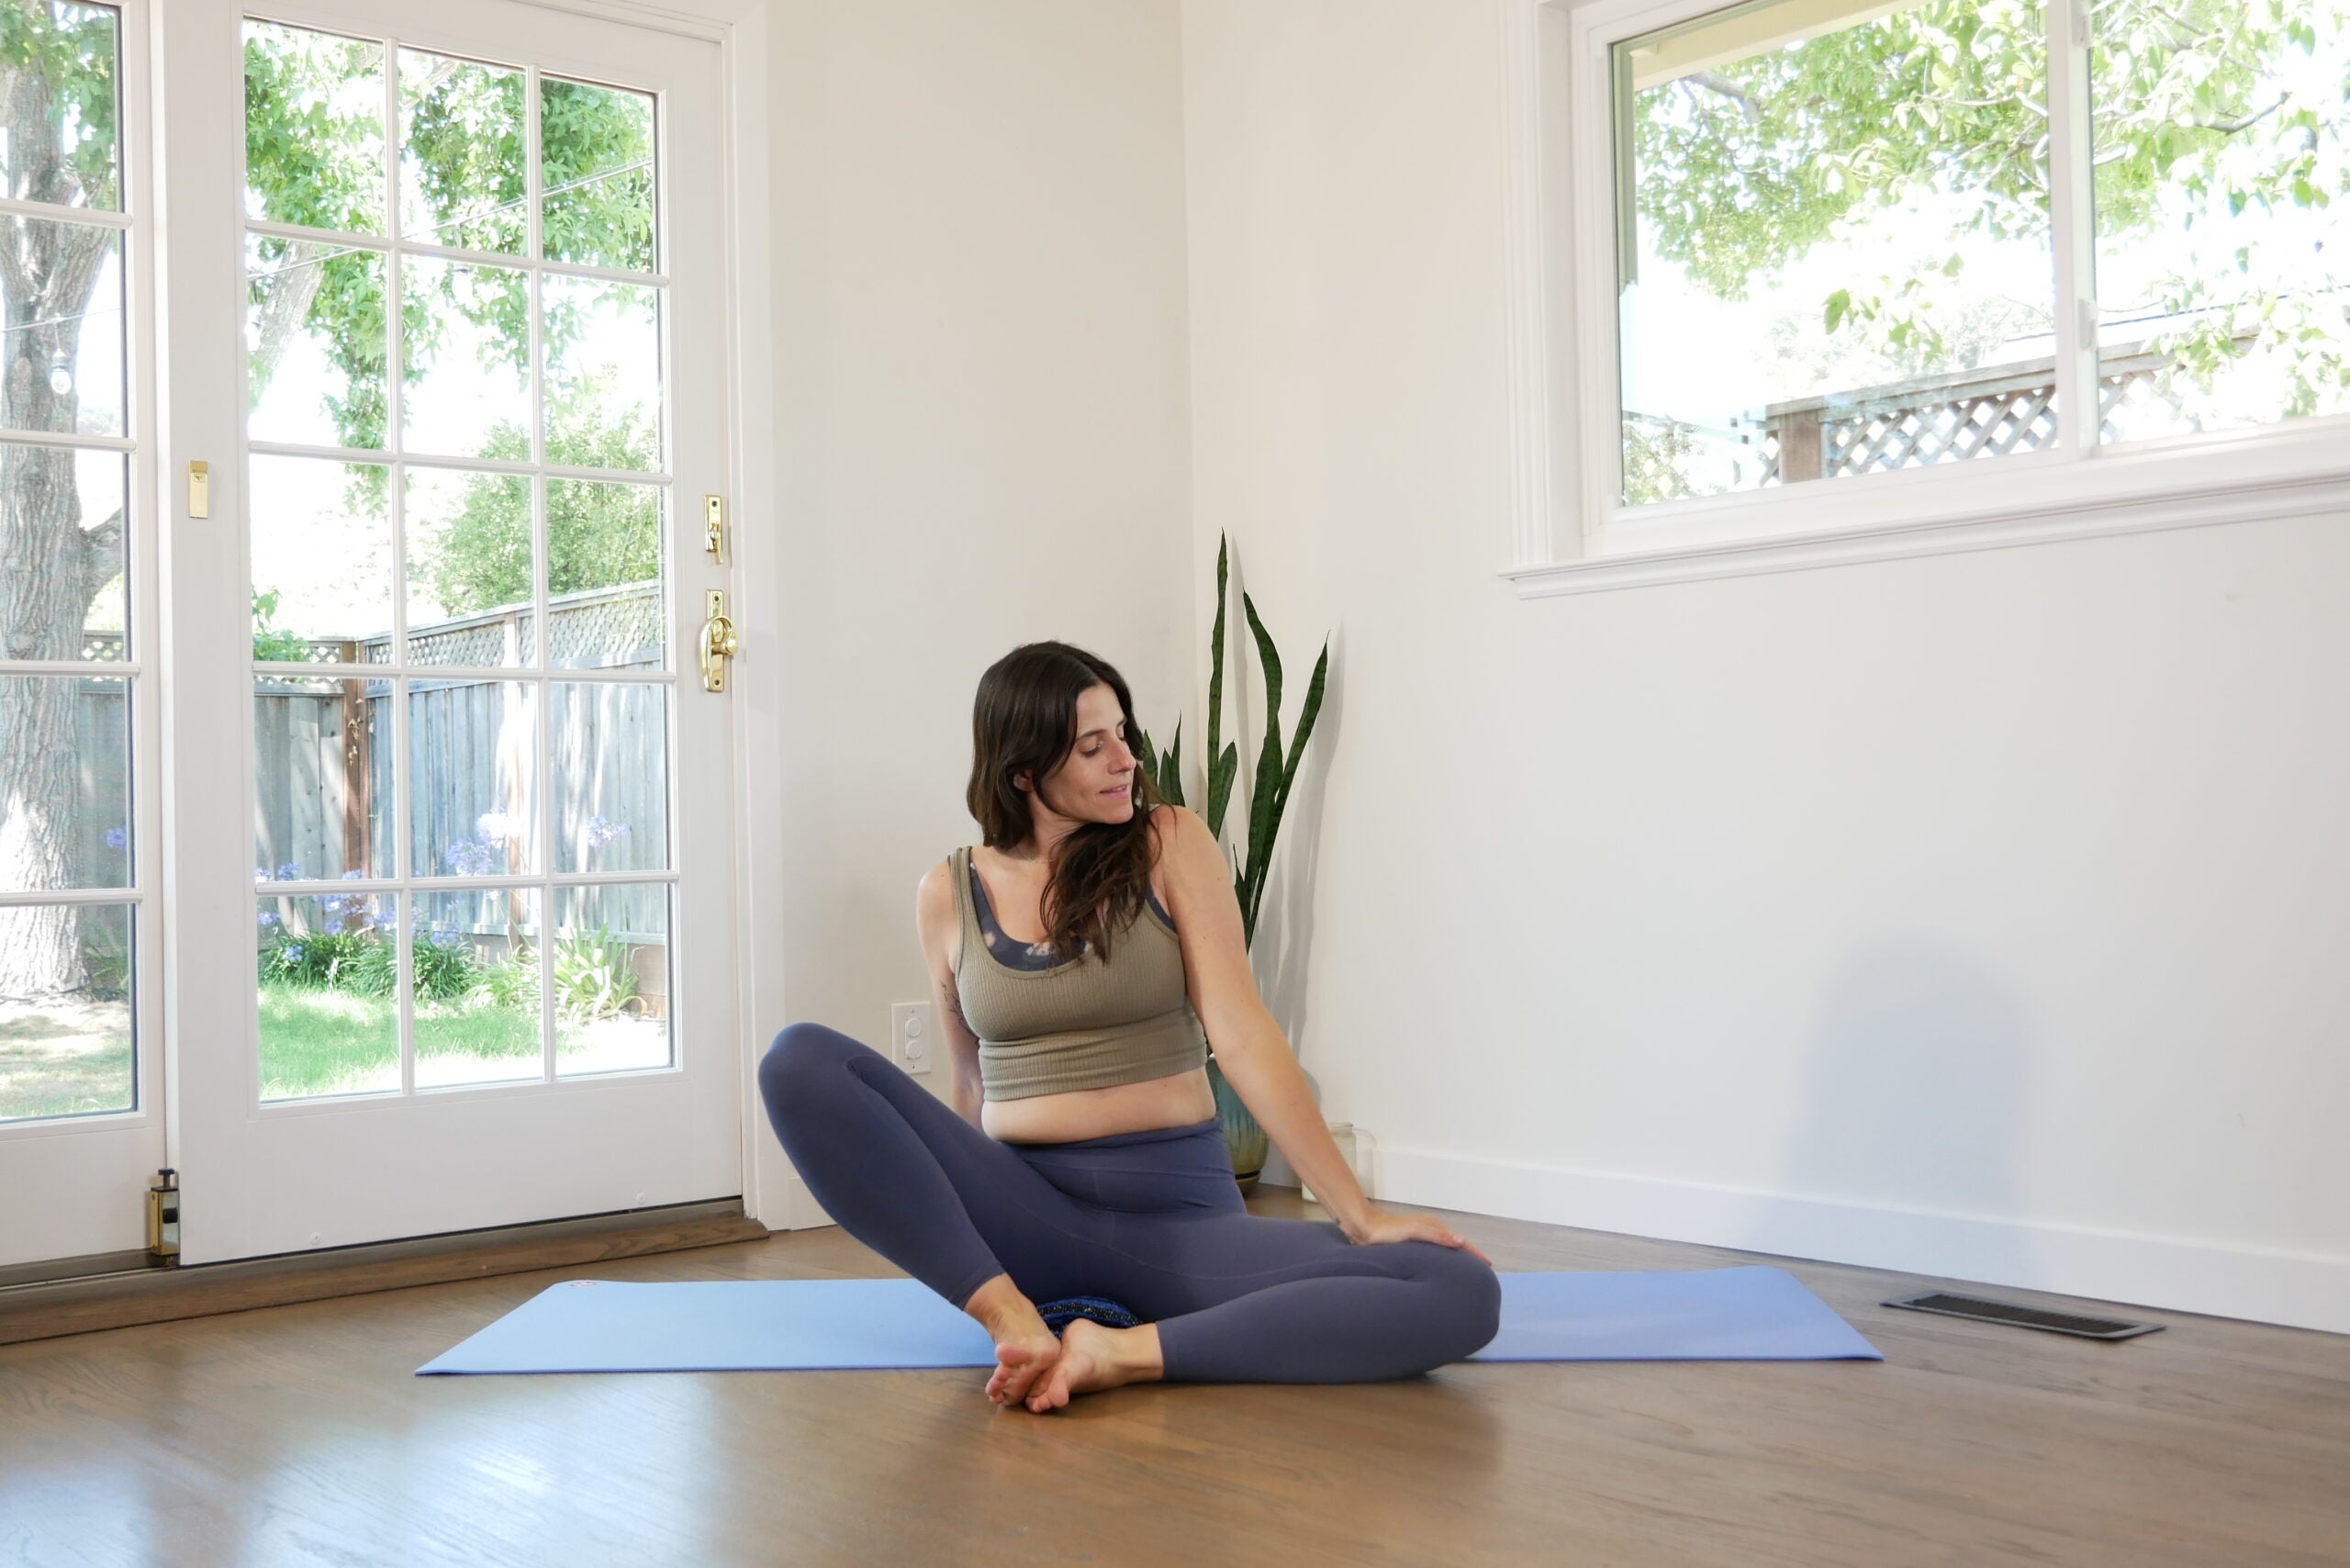 Premium Photo  Woman practicing yoga does an exercise in pose